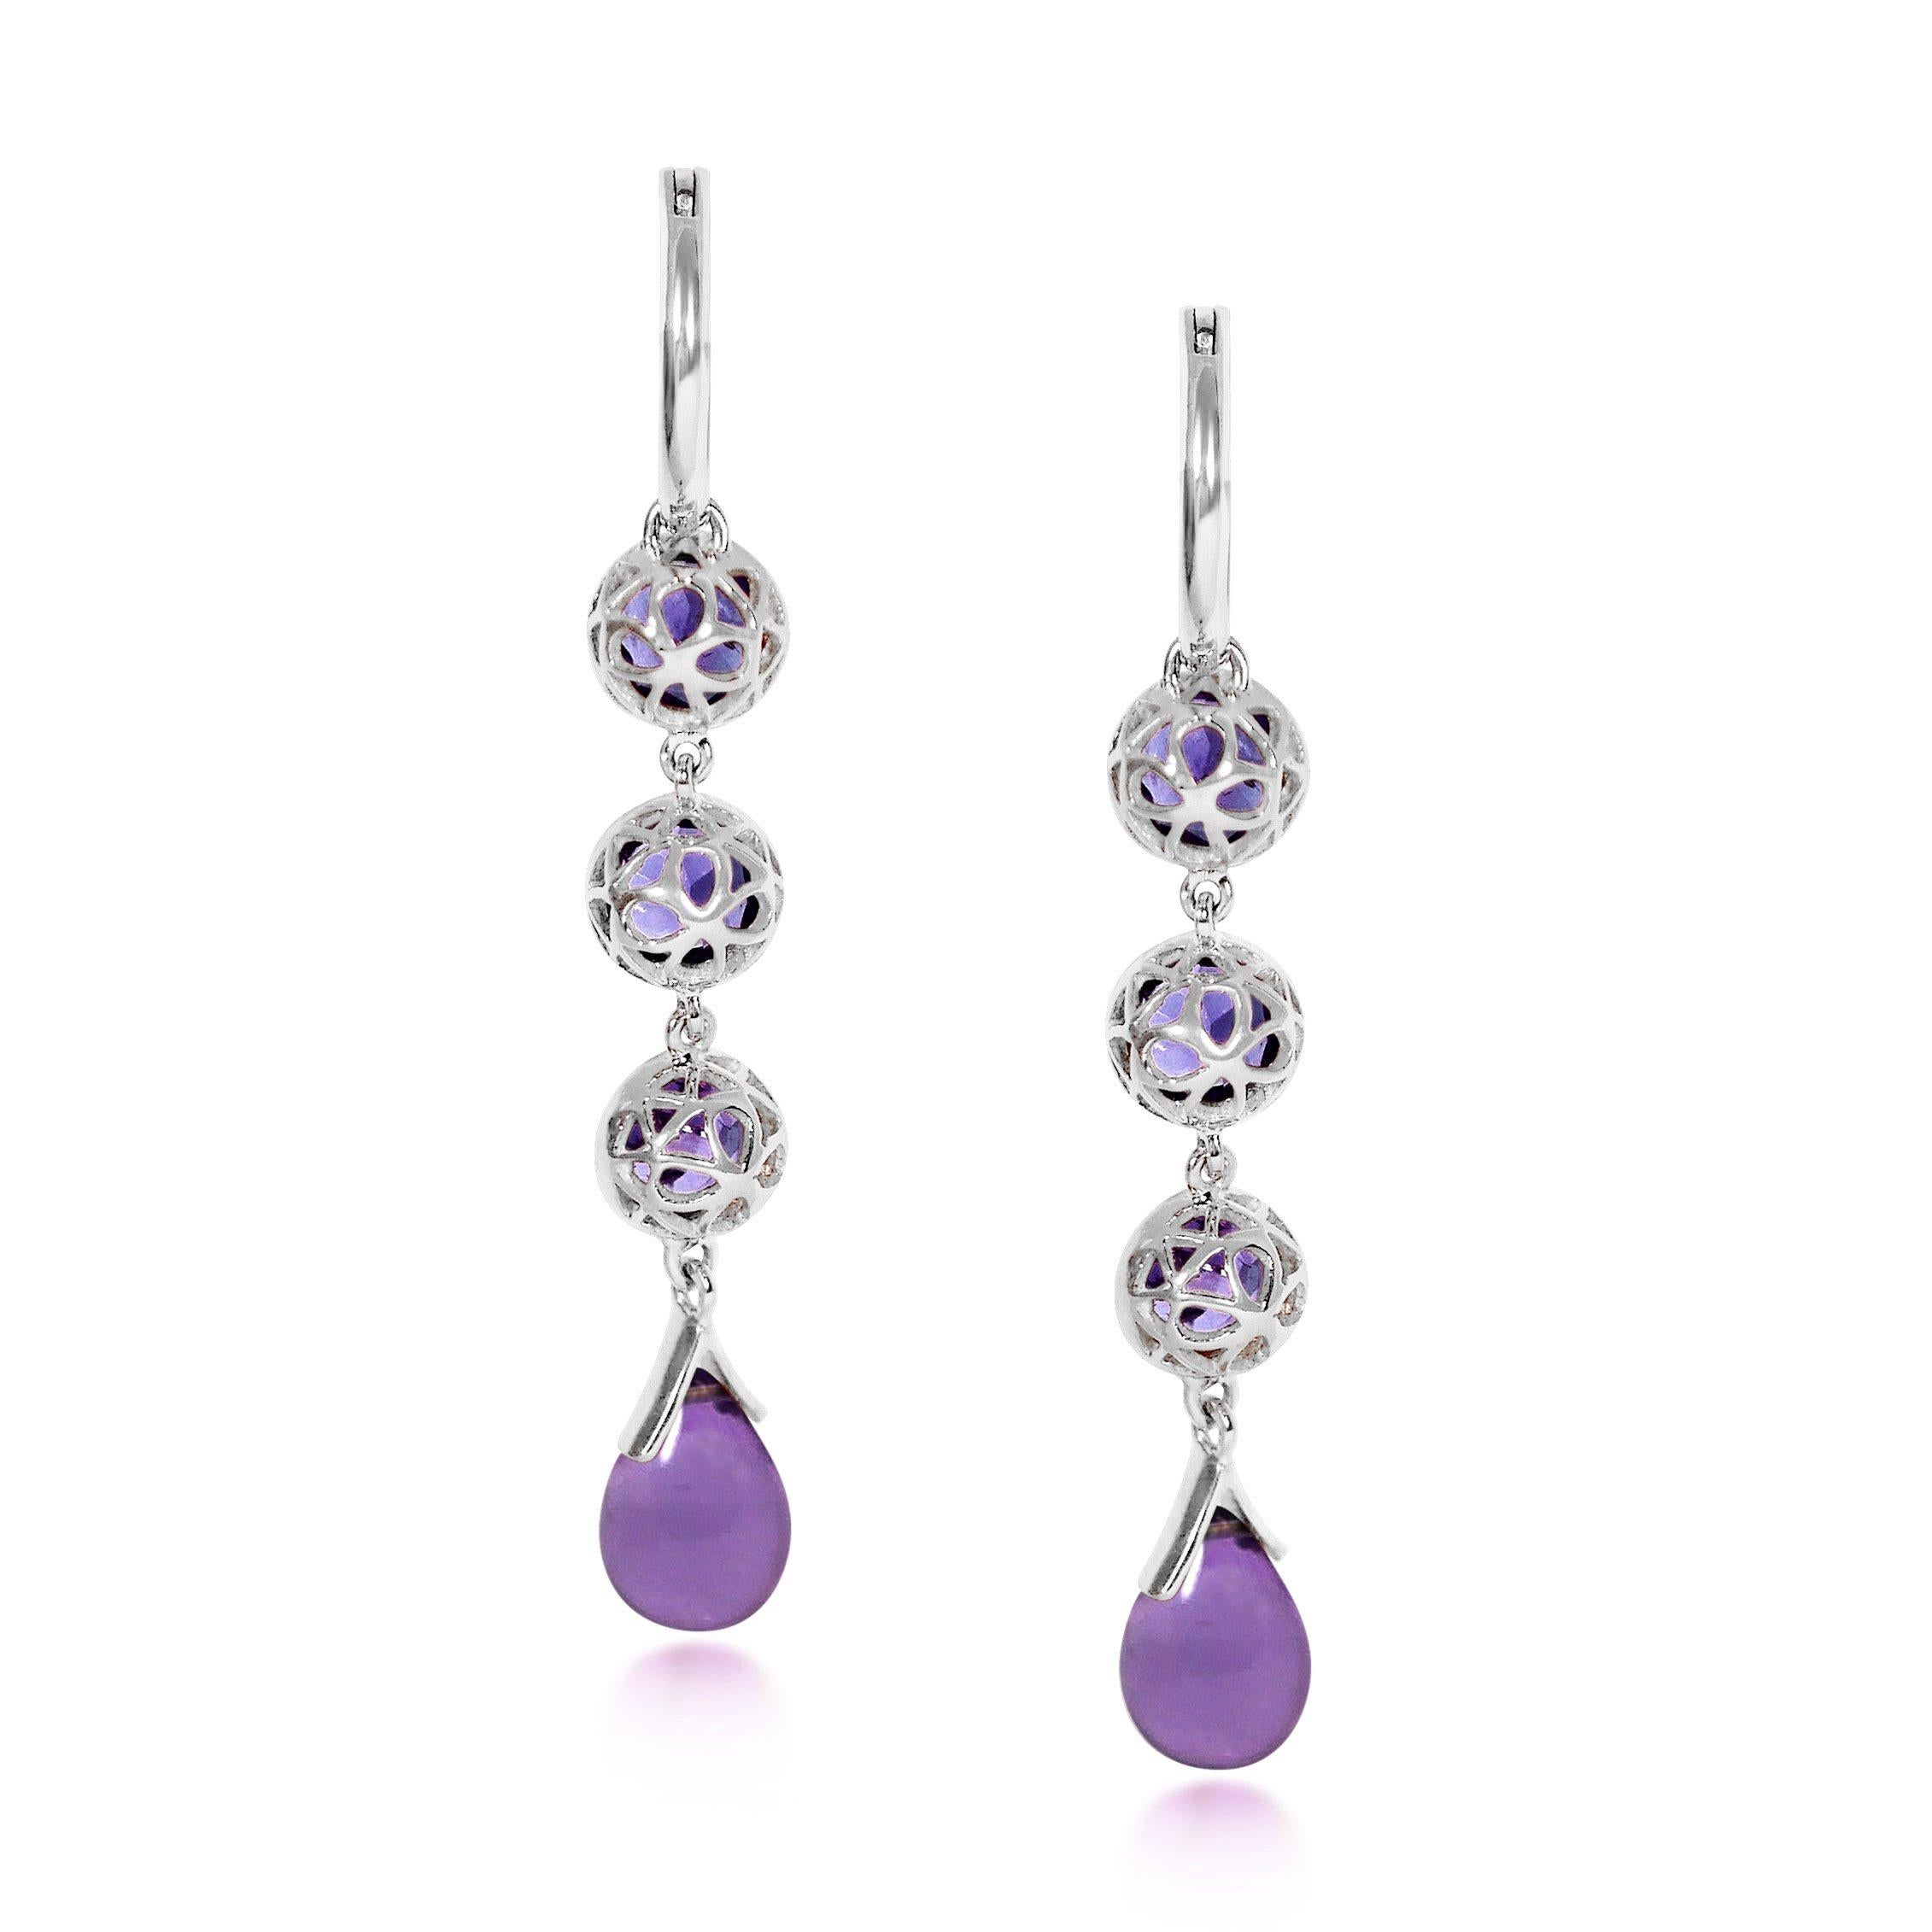 Handcrafted 1.50 Carats Amethysts 18 Karat White Gold Drop Earrings. Our stone cascade-like earrings are an elegant statement underlined by romantic dancing drops carved in Amethyst under a set of 6mm round cut Amethyst stones encased in our iconic